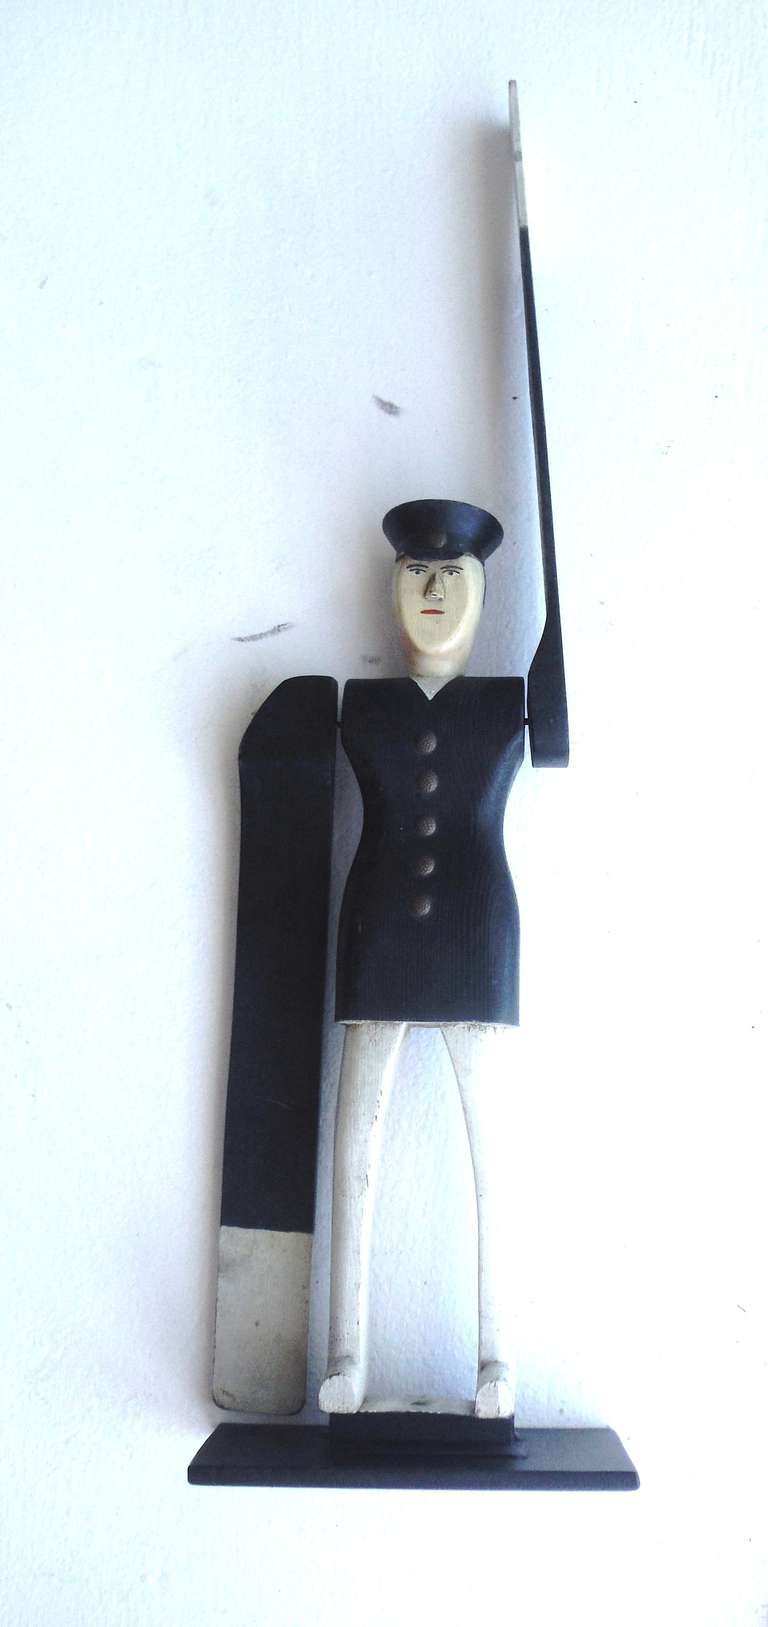 This very rare turn-of-the-century New England policeman whirligig is in spectacular untouched condition.  This piece shows all original painted surfaces along with brass buttons and fixtures.  Hand carved from pine, the figure's paddle arms are